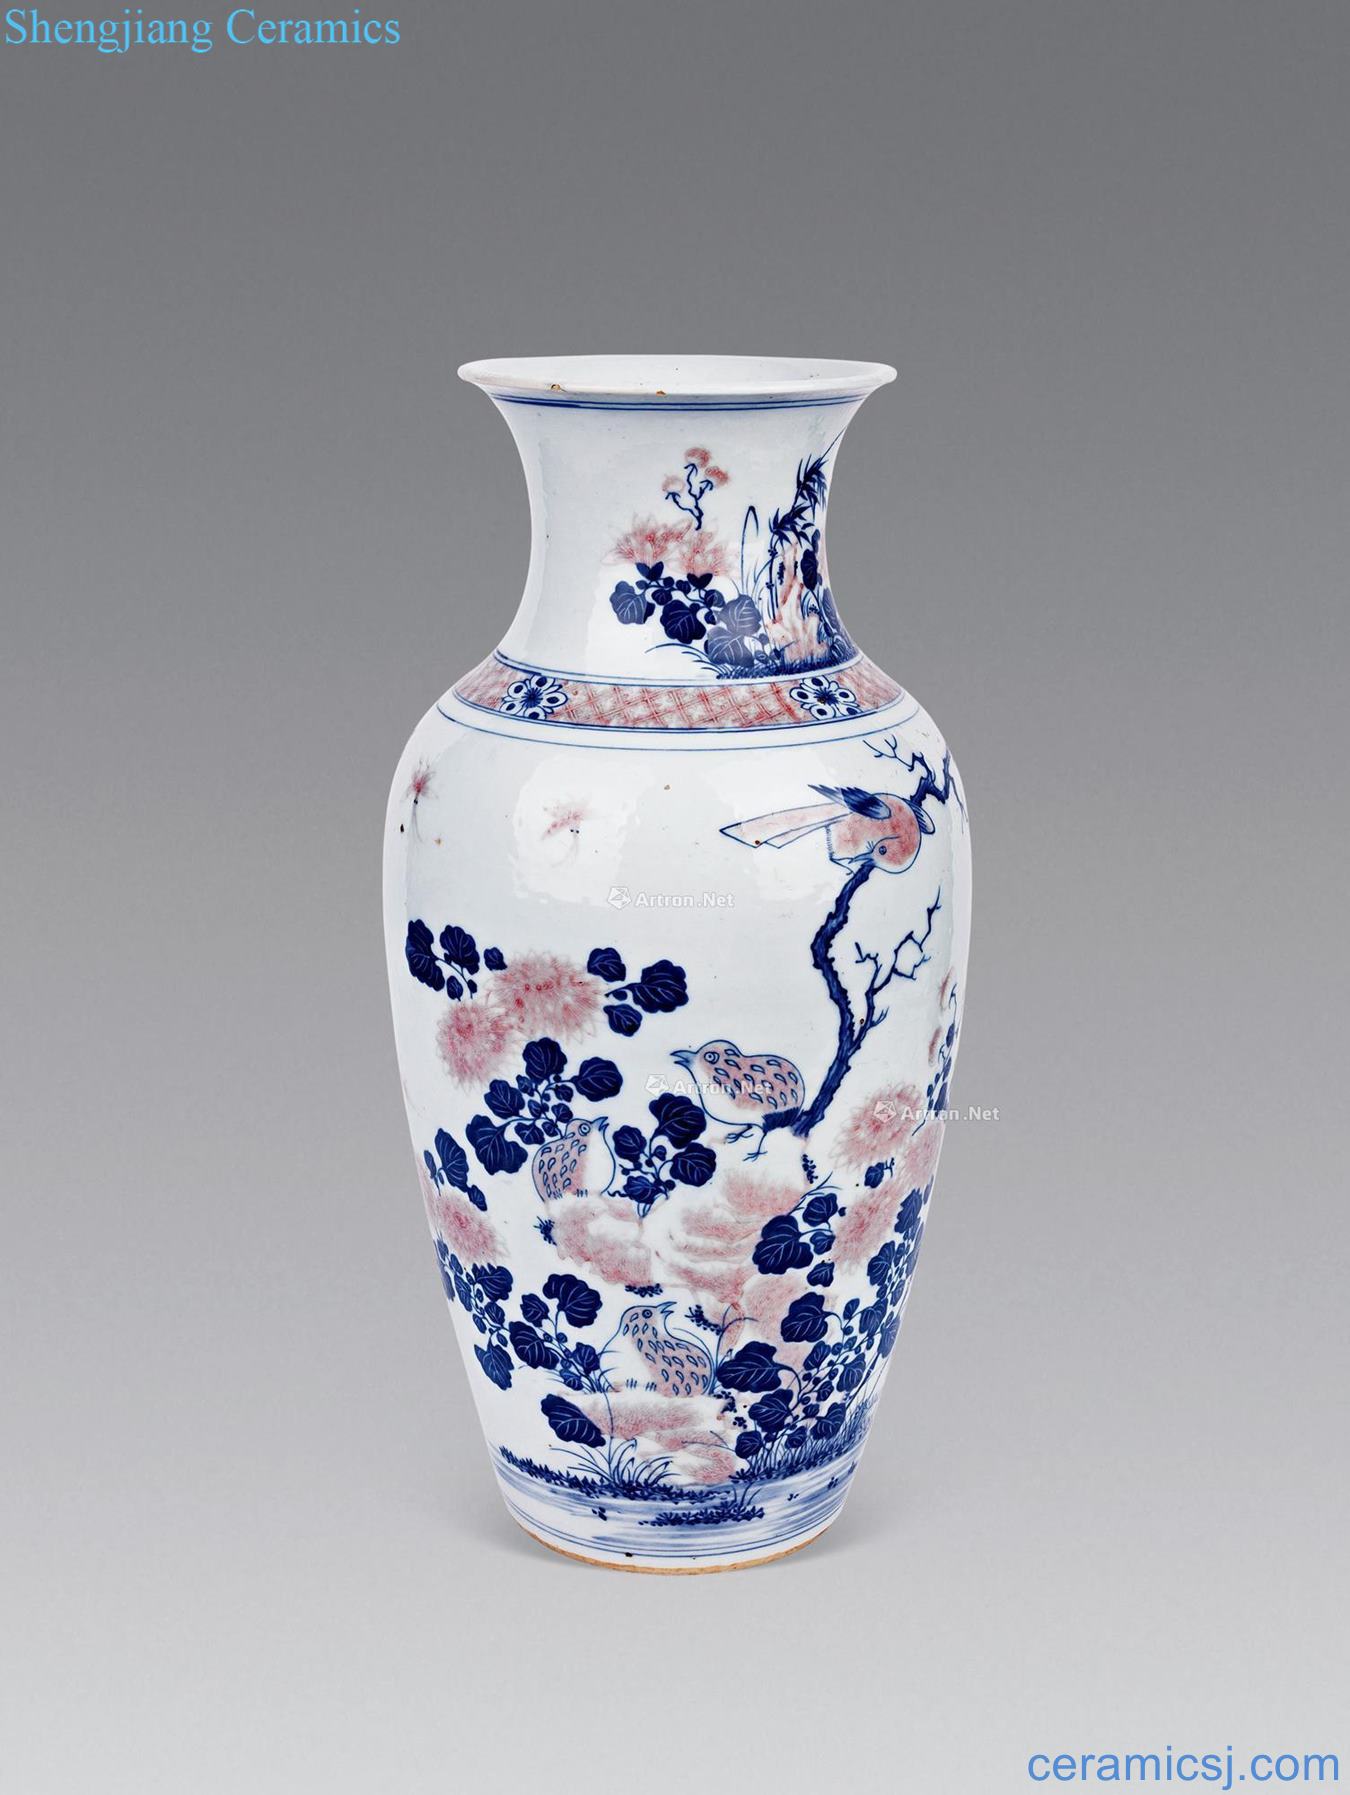 In the qing dynasty Blue and white youligong painting of flowers and a bottle